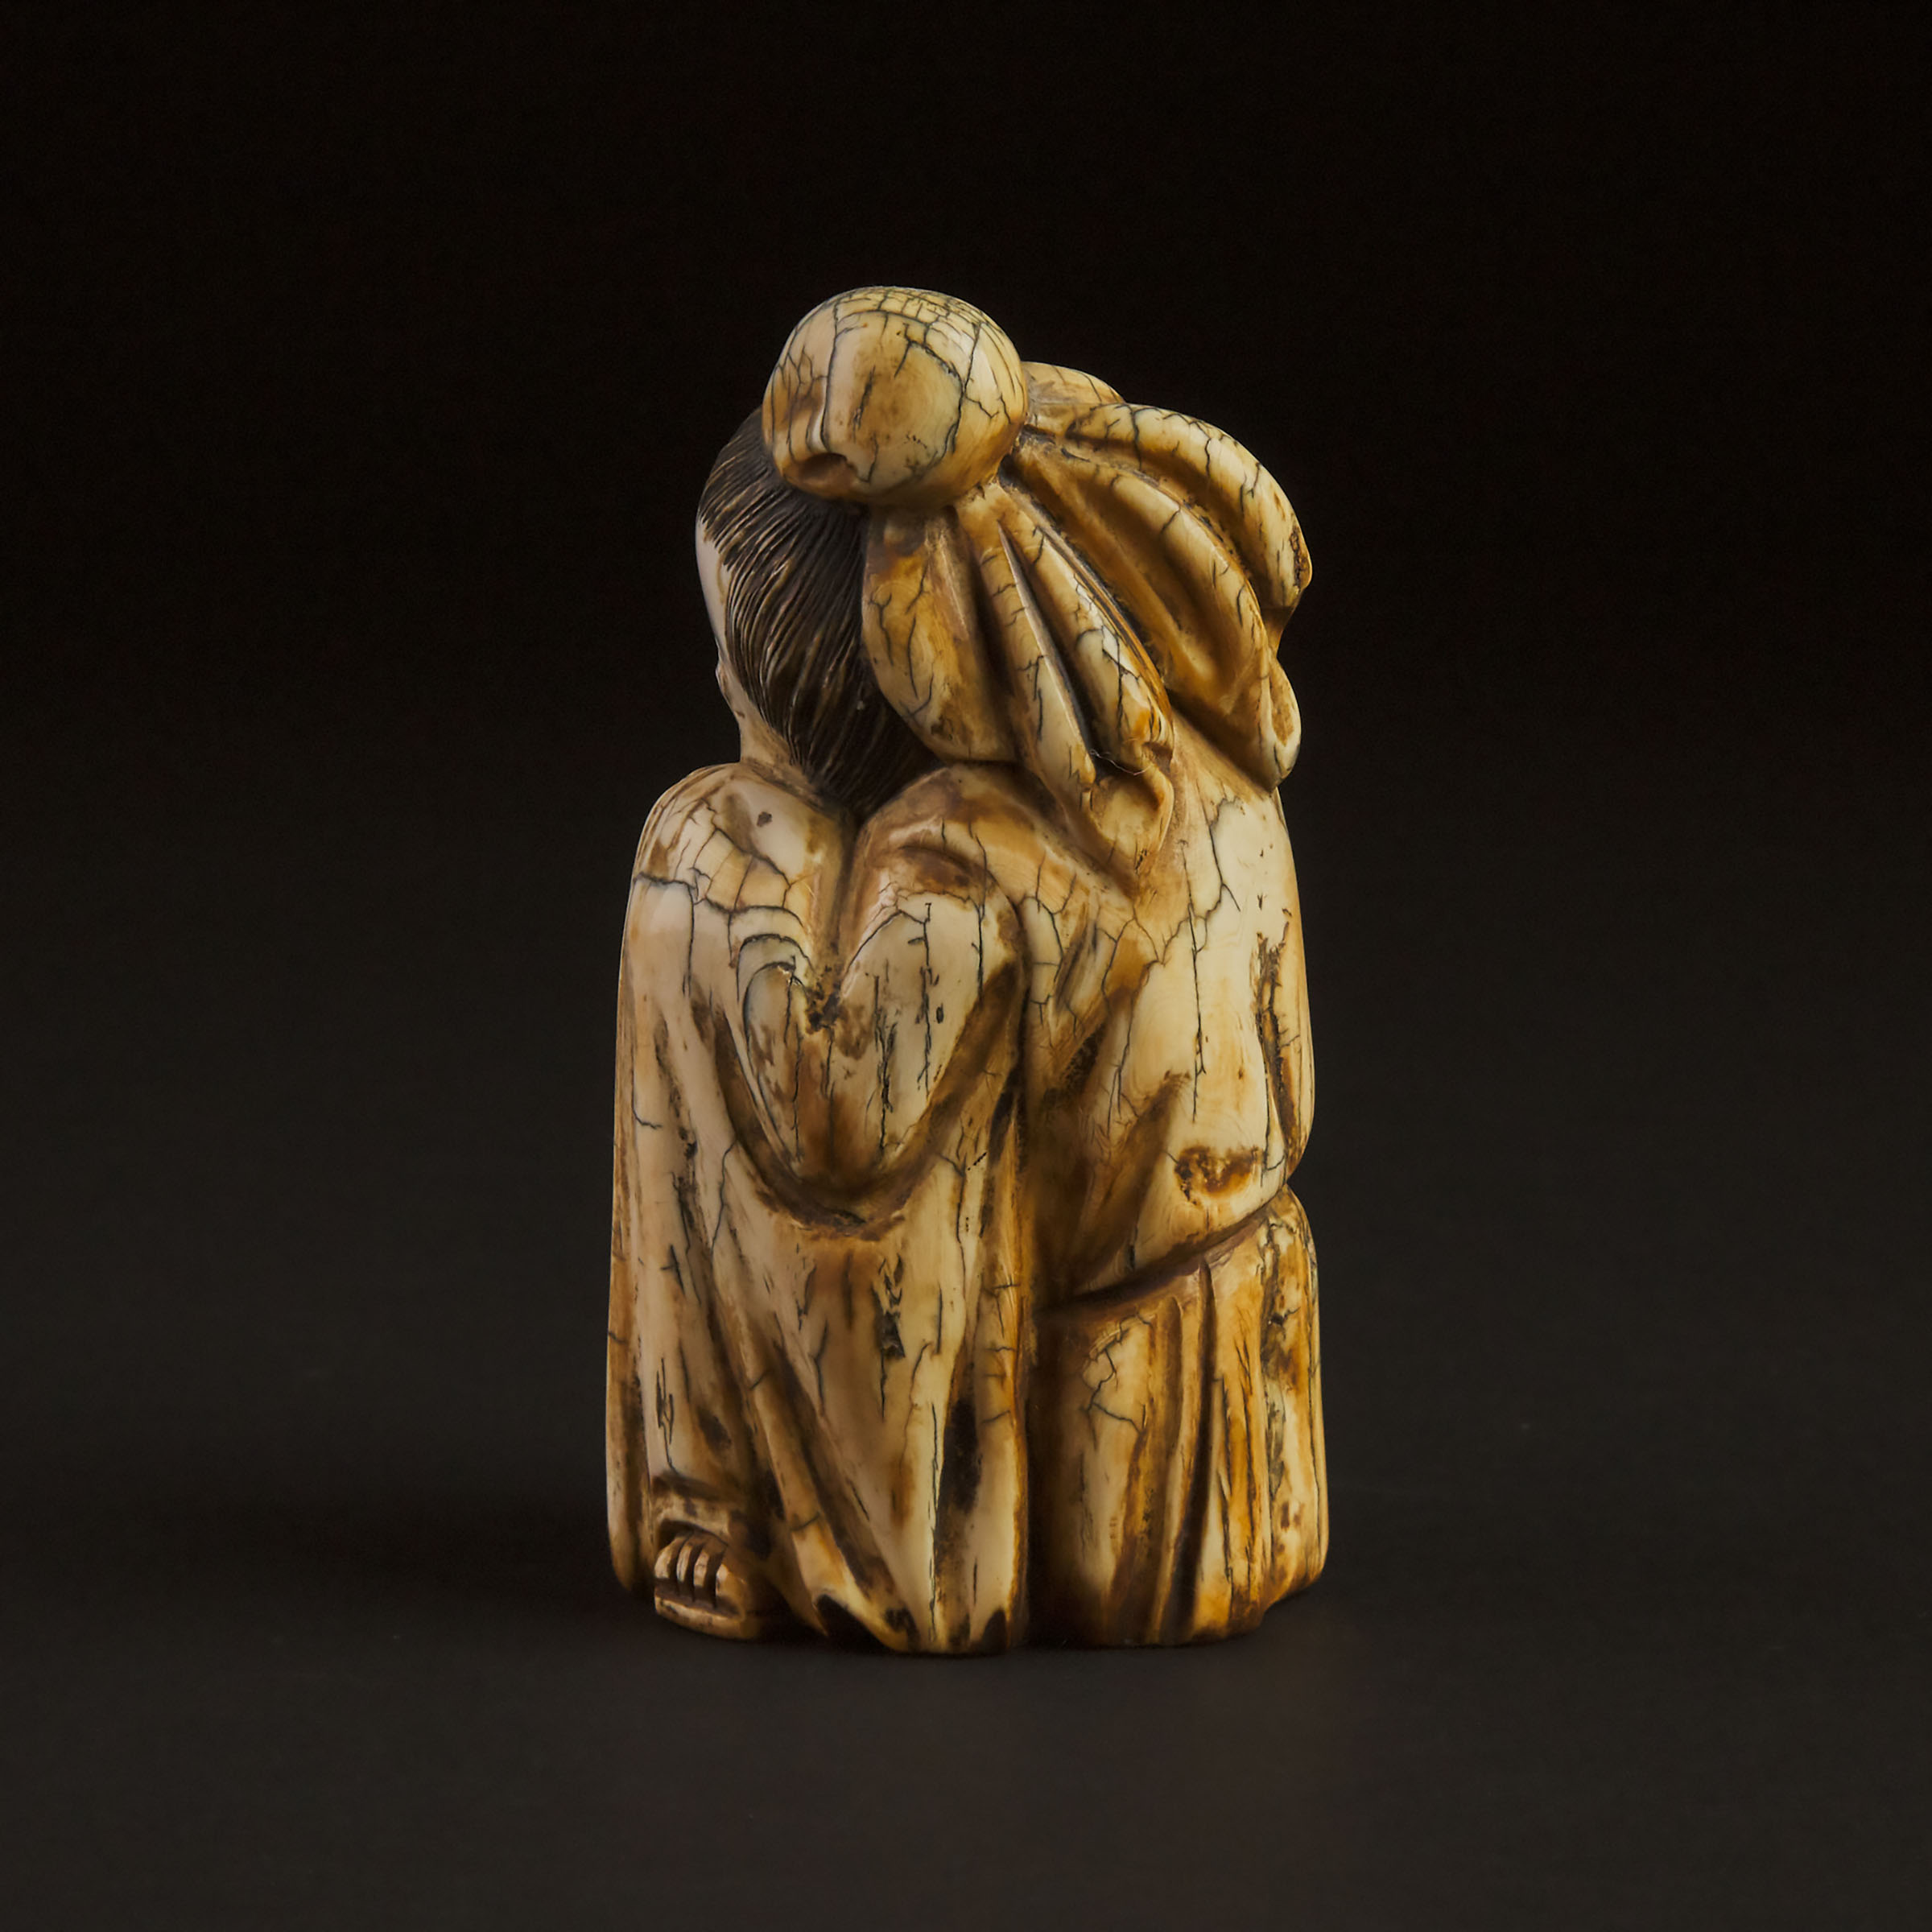 An Ivory Carving of the Drunken Poet Li Bai, Early to Mid 20th Century